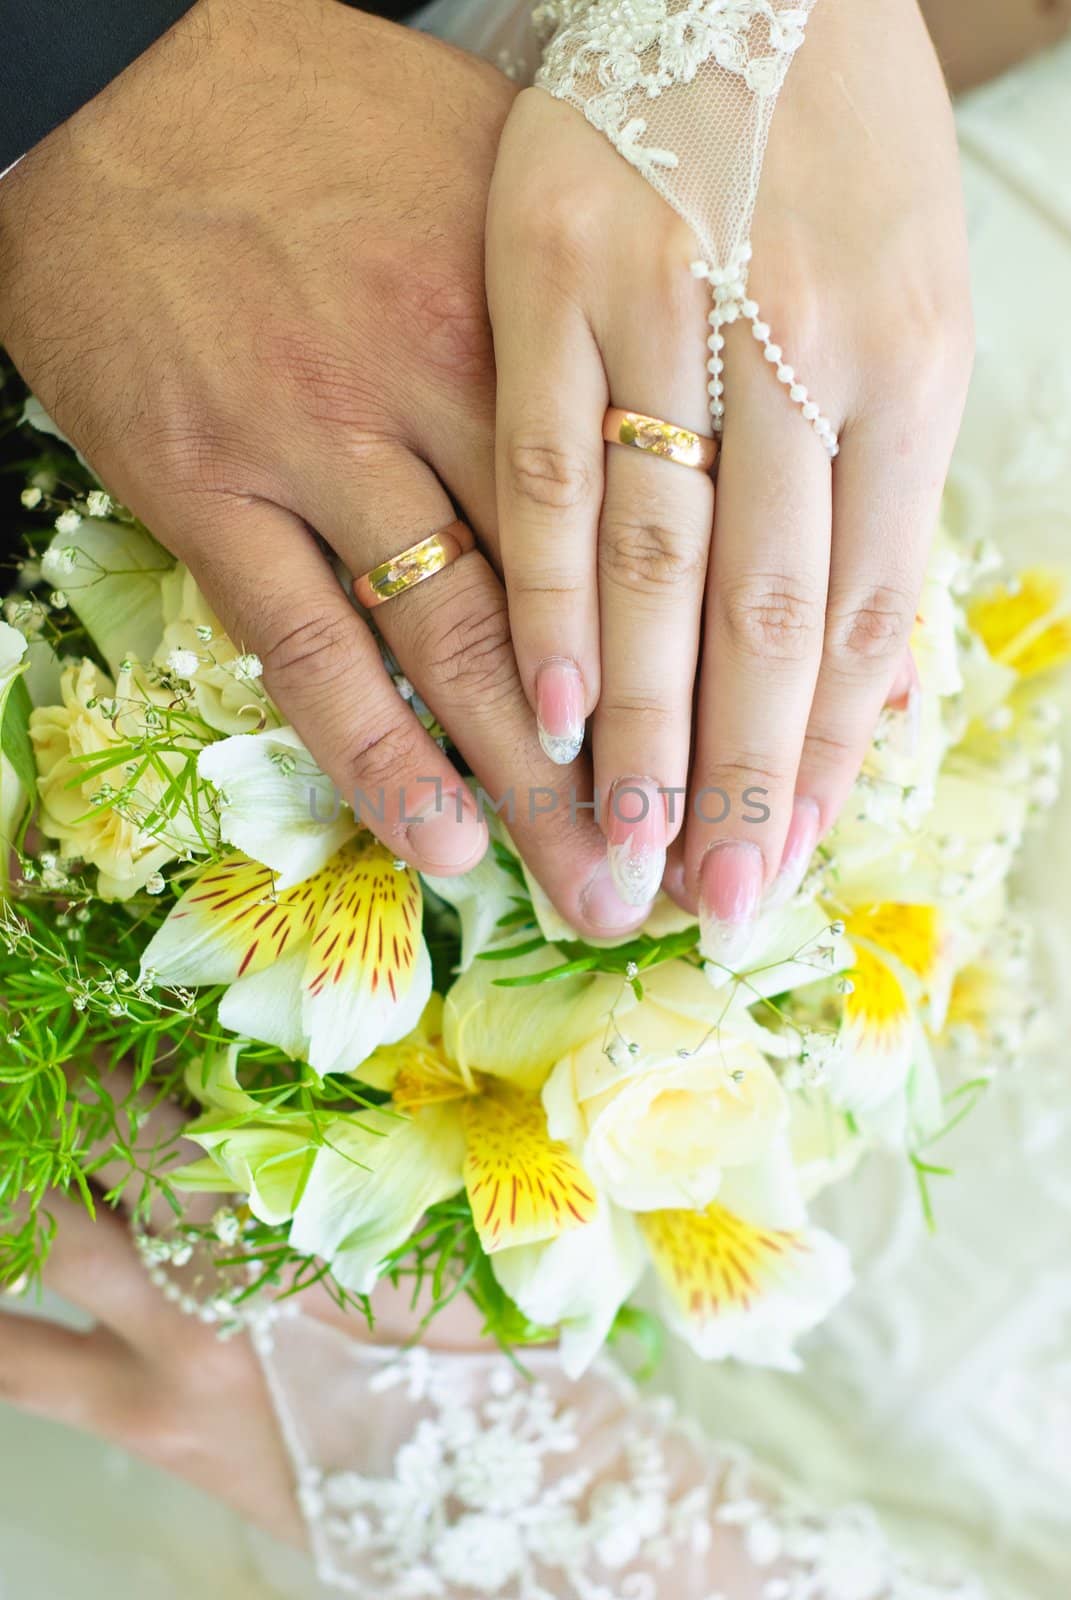 Hands of bride and groom with wedding rings over the bridal bouquet